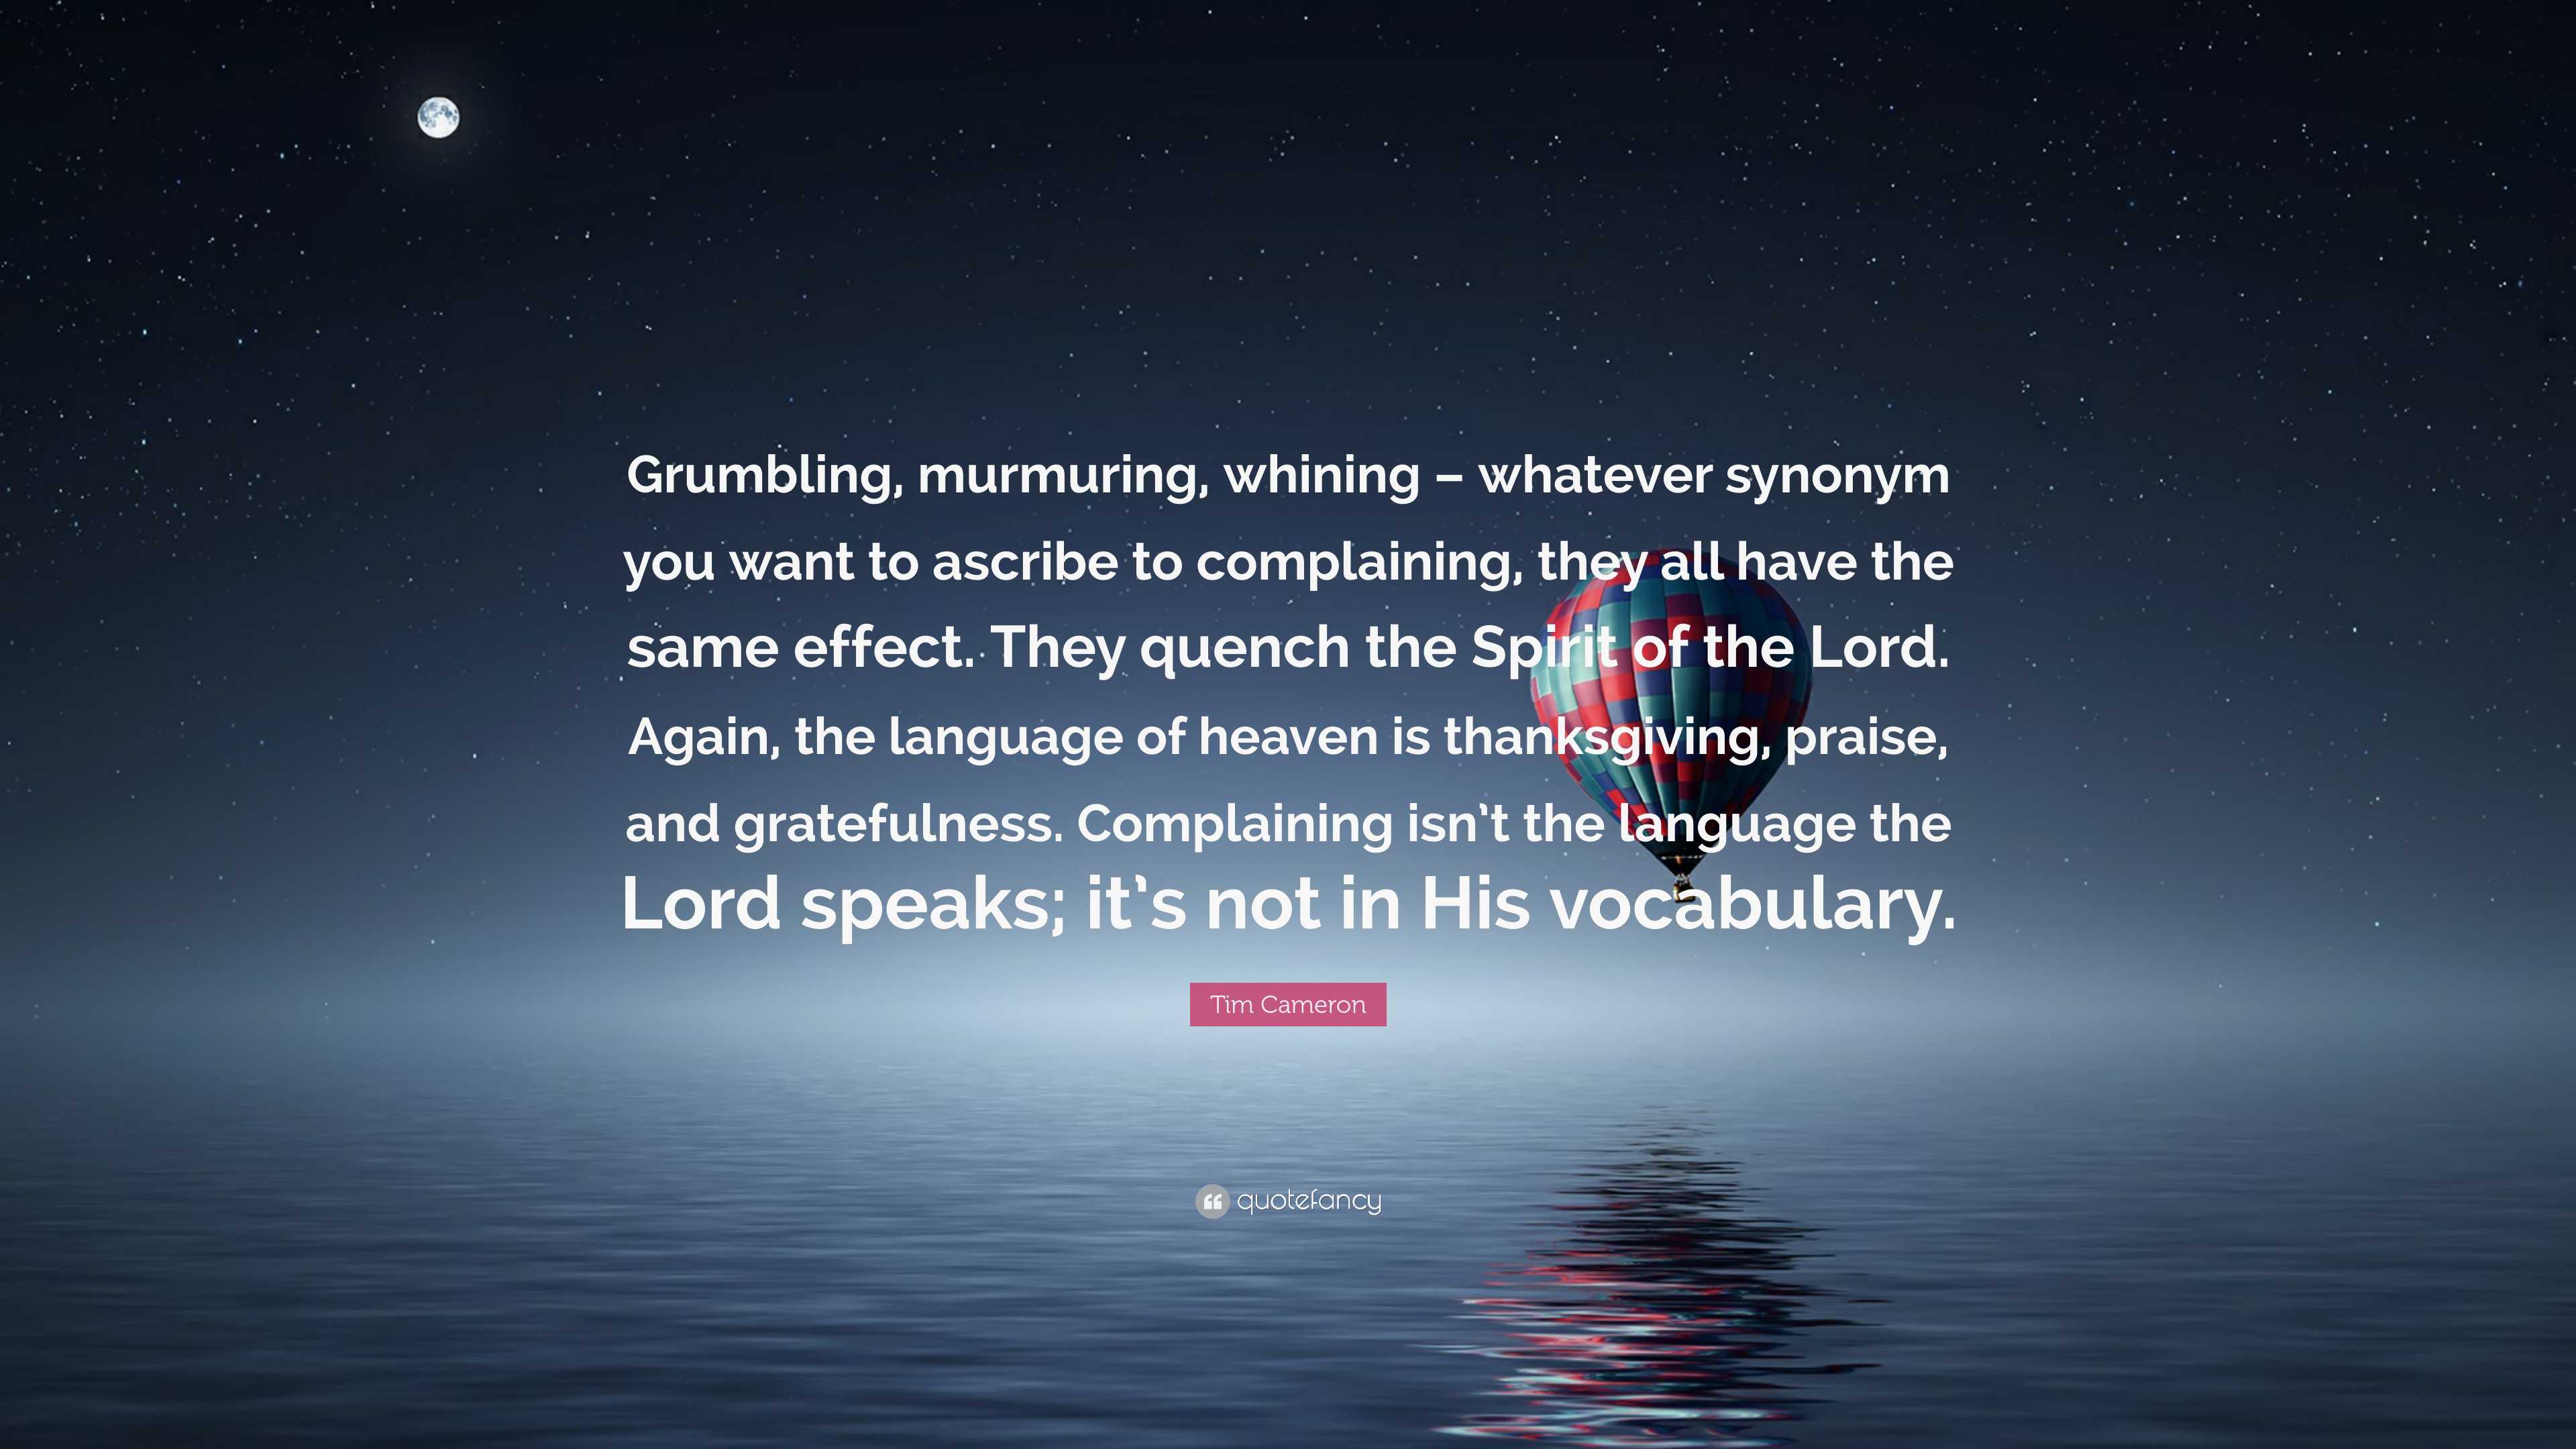 Tim Cameron Quote: “Grumbling, murmuring, whining – whatever